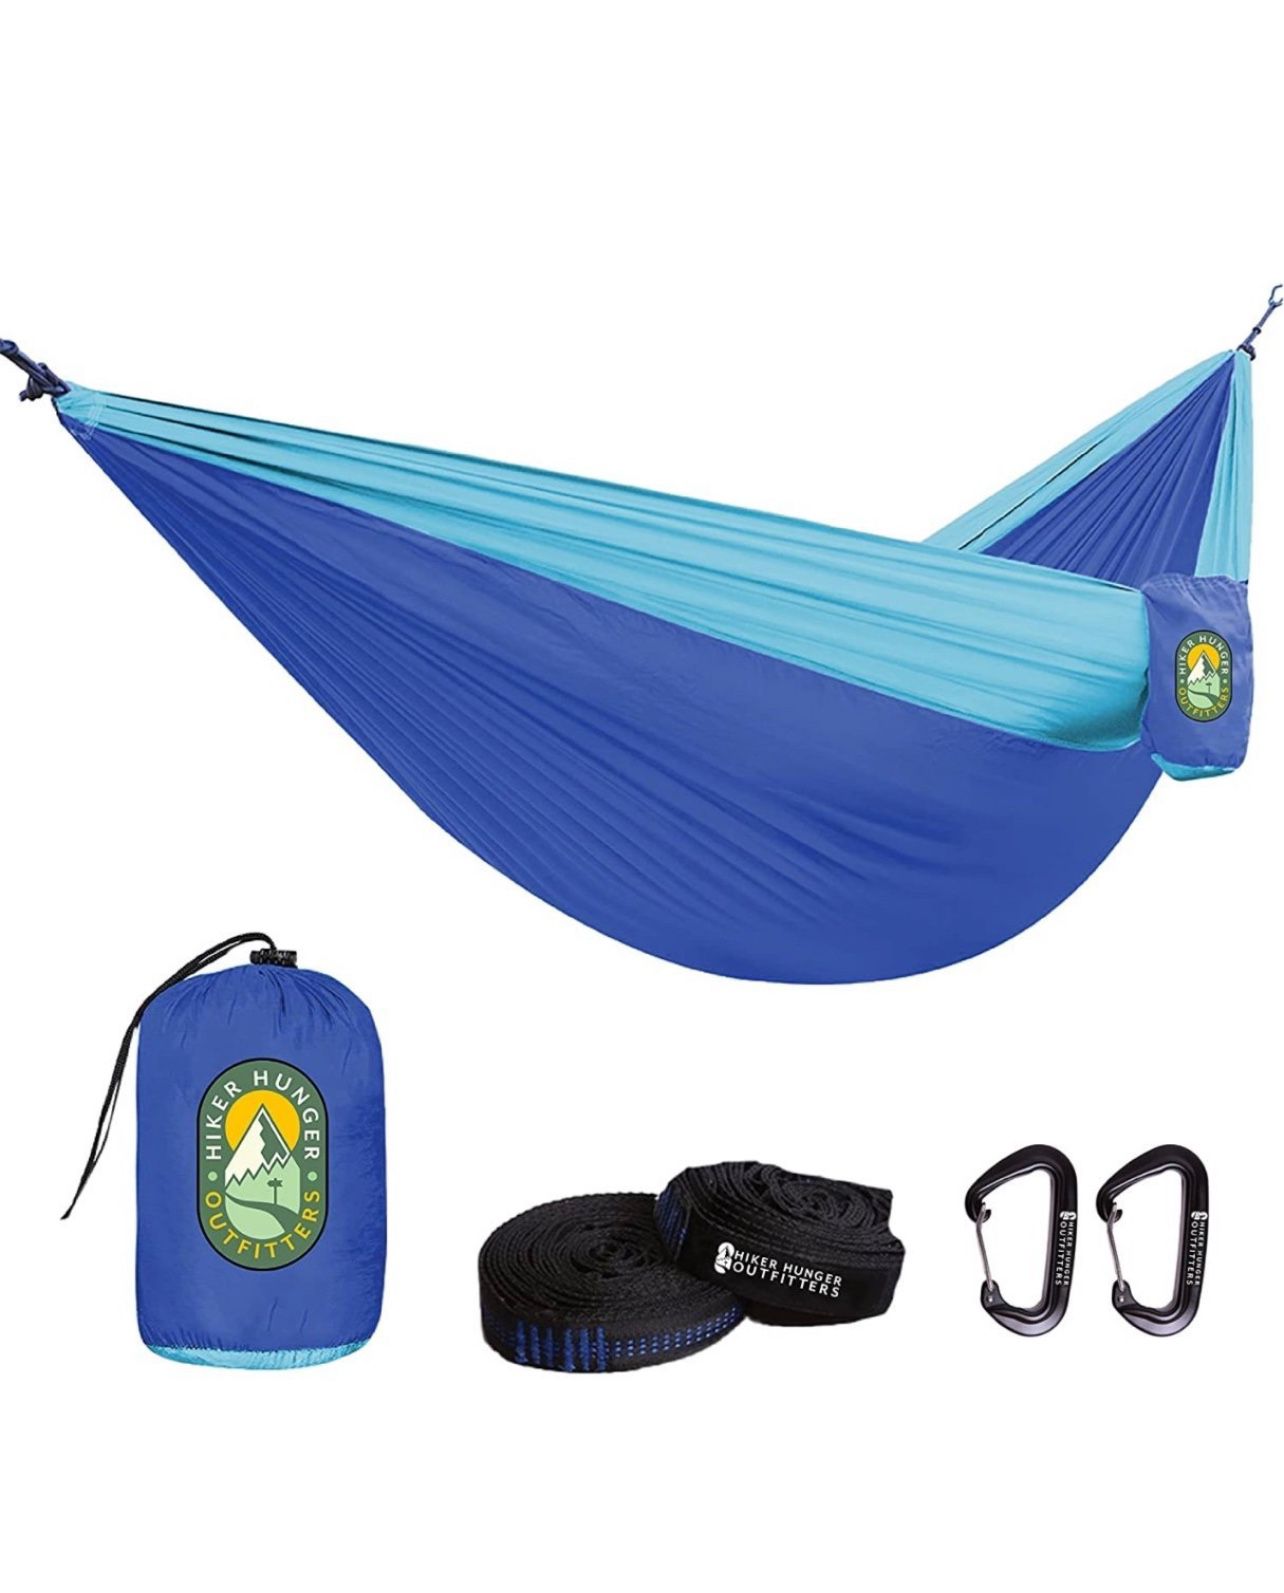 Double camping hammock (blue)